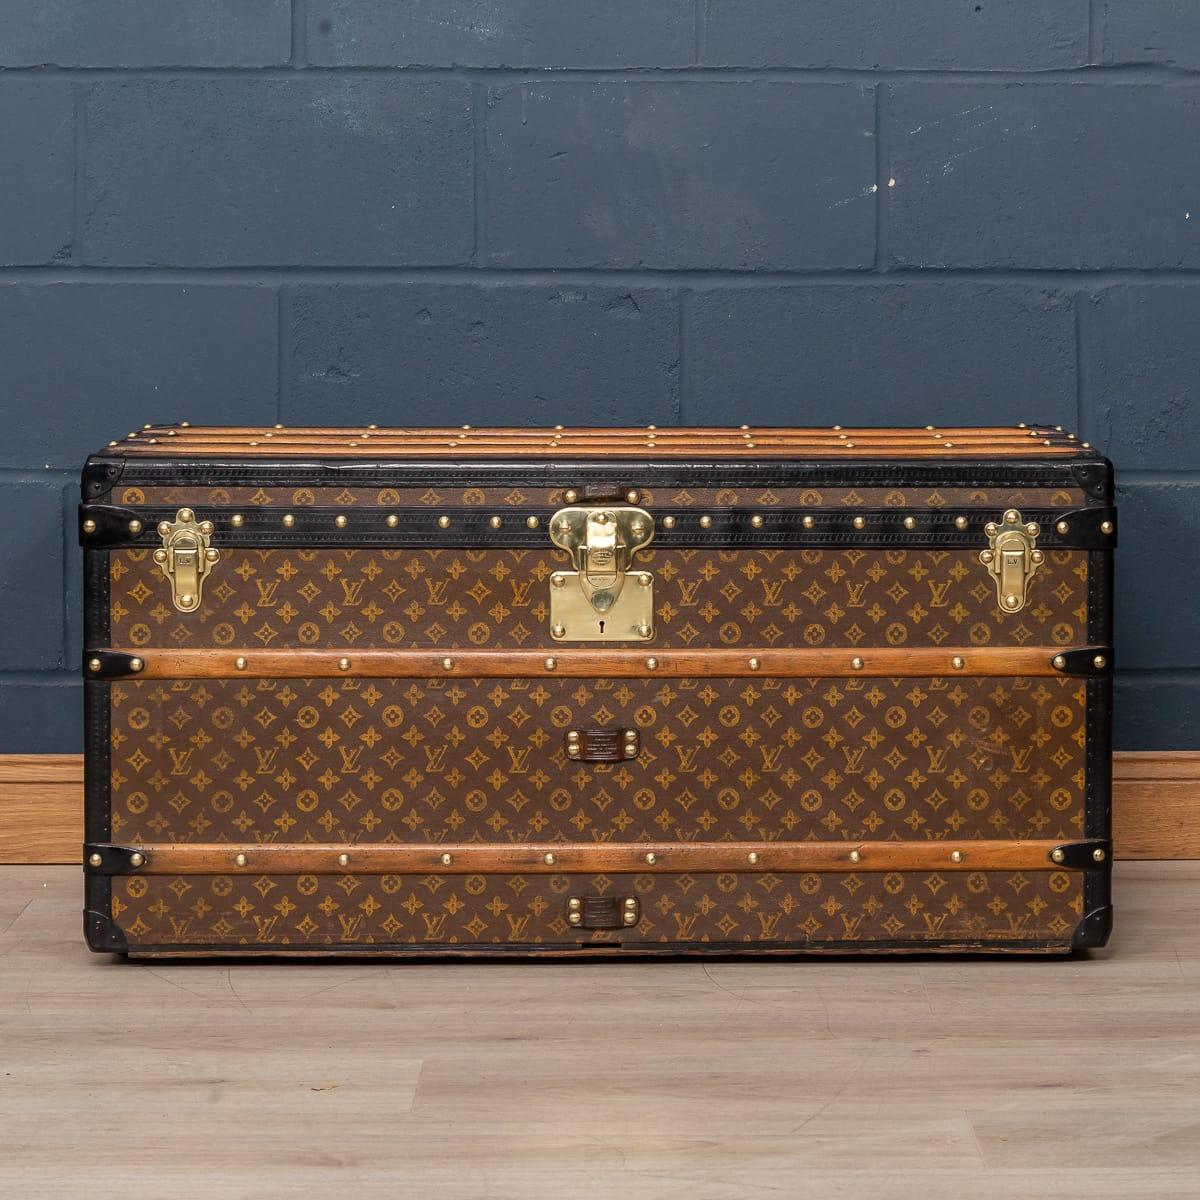 Stunning and most importantly complete, this early 20th century Louis Vuitton trunk was the must have item of any elite traveler. Covered in the world famous LV monogrammed canvas, with its lozine borders and brass fitting it would have been the top